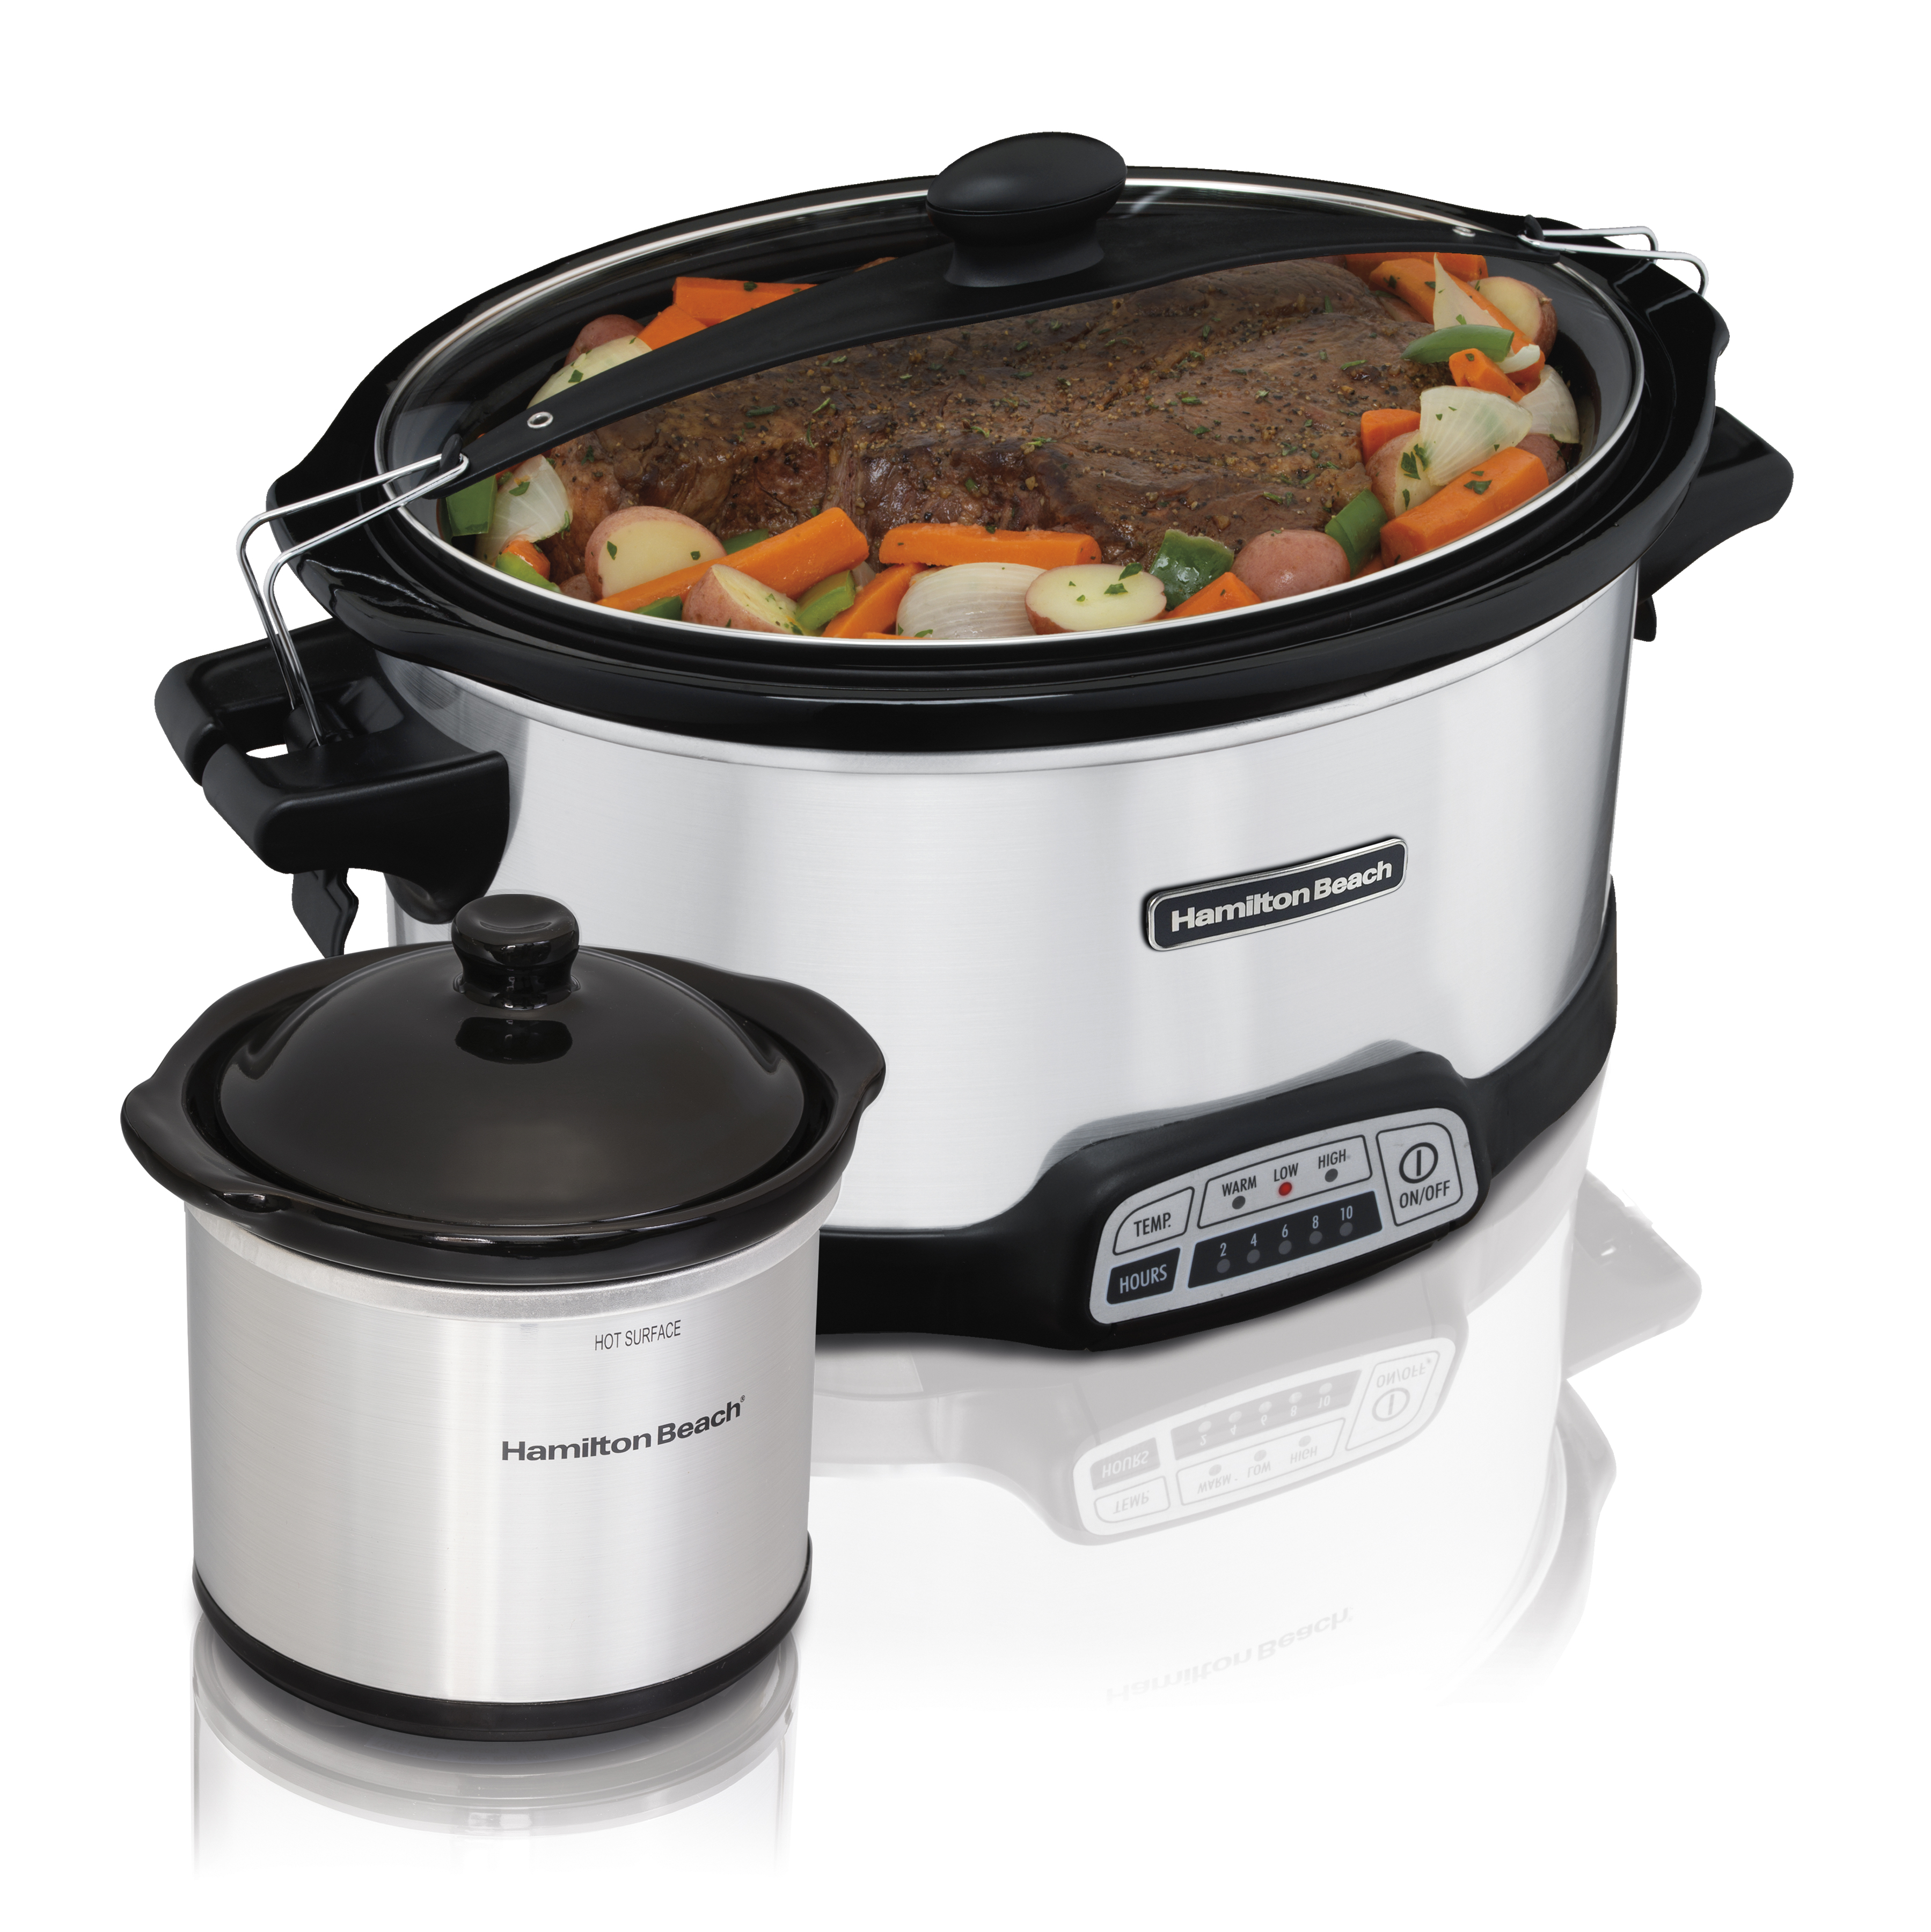 Hamilton Beach Stay or Go Programmable Slow Cooker with Party Dipper, 7 Quart Capacity, Removable Crock, Stainless Steel, 33477 - image 1 of 7